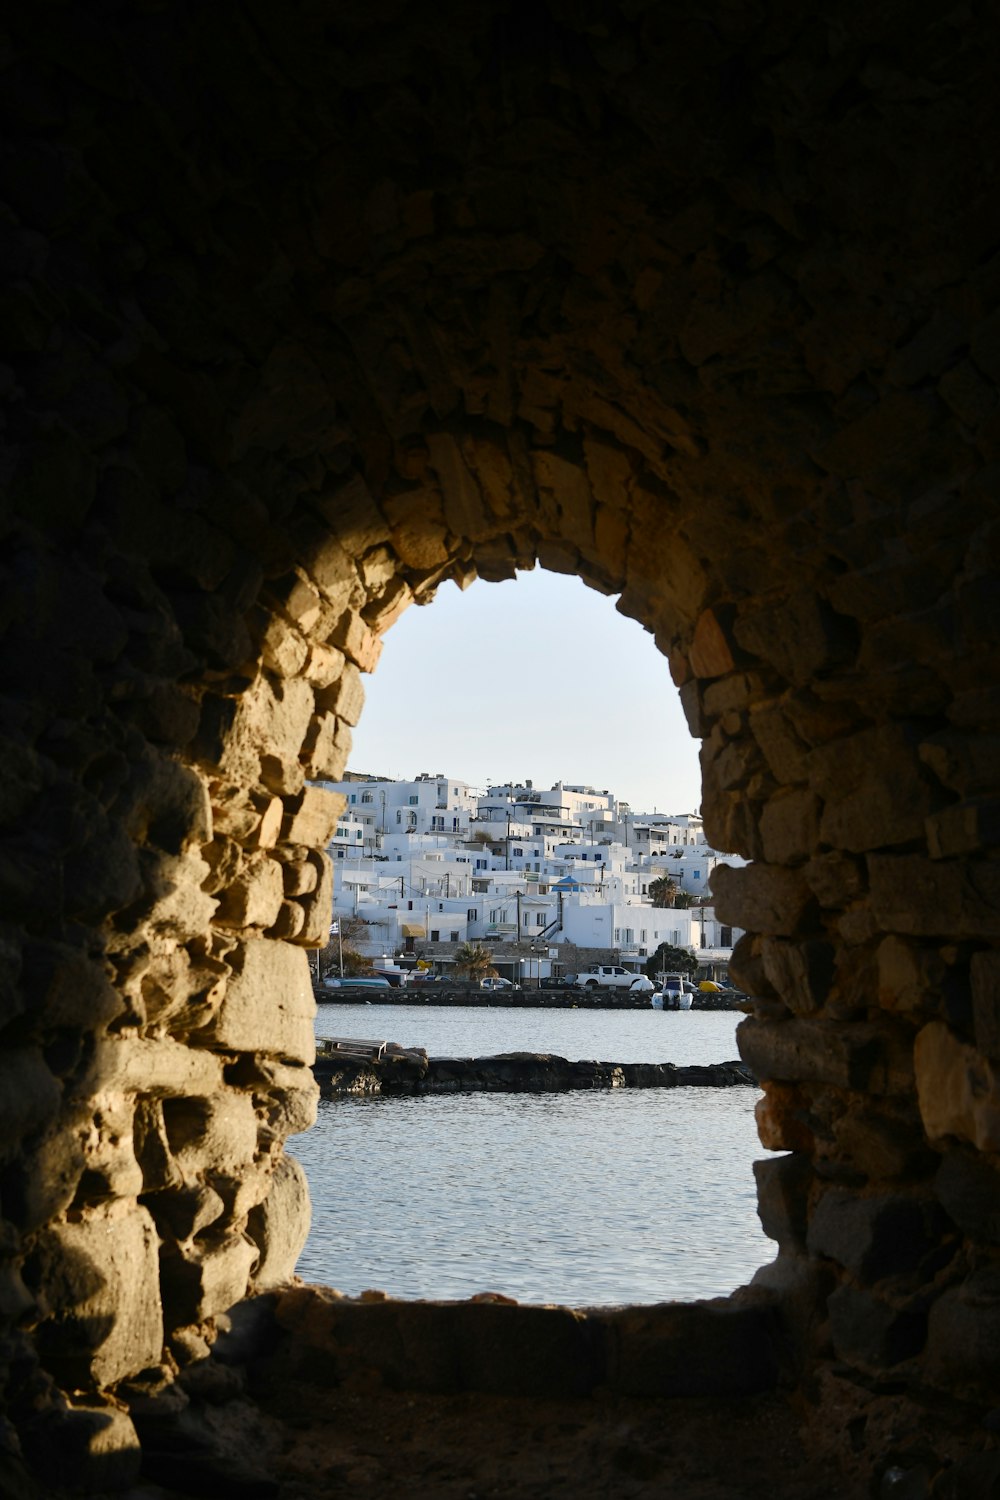 a view of a body of water through a stone archway